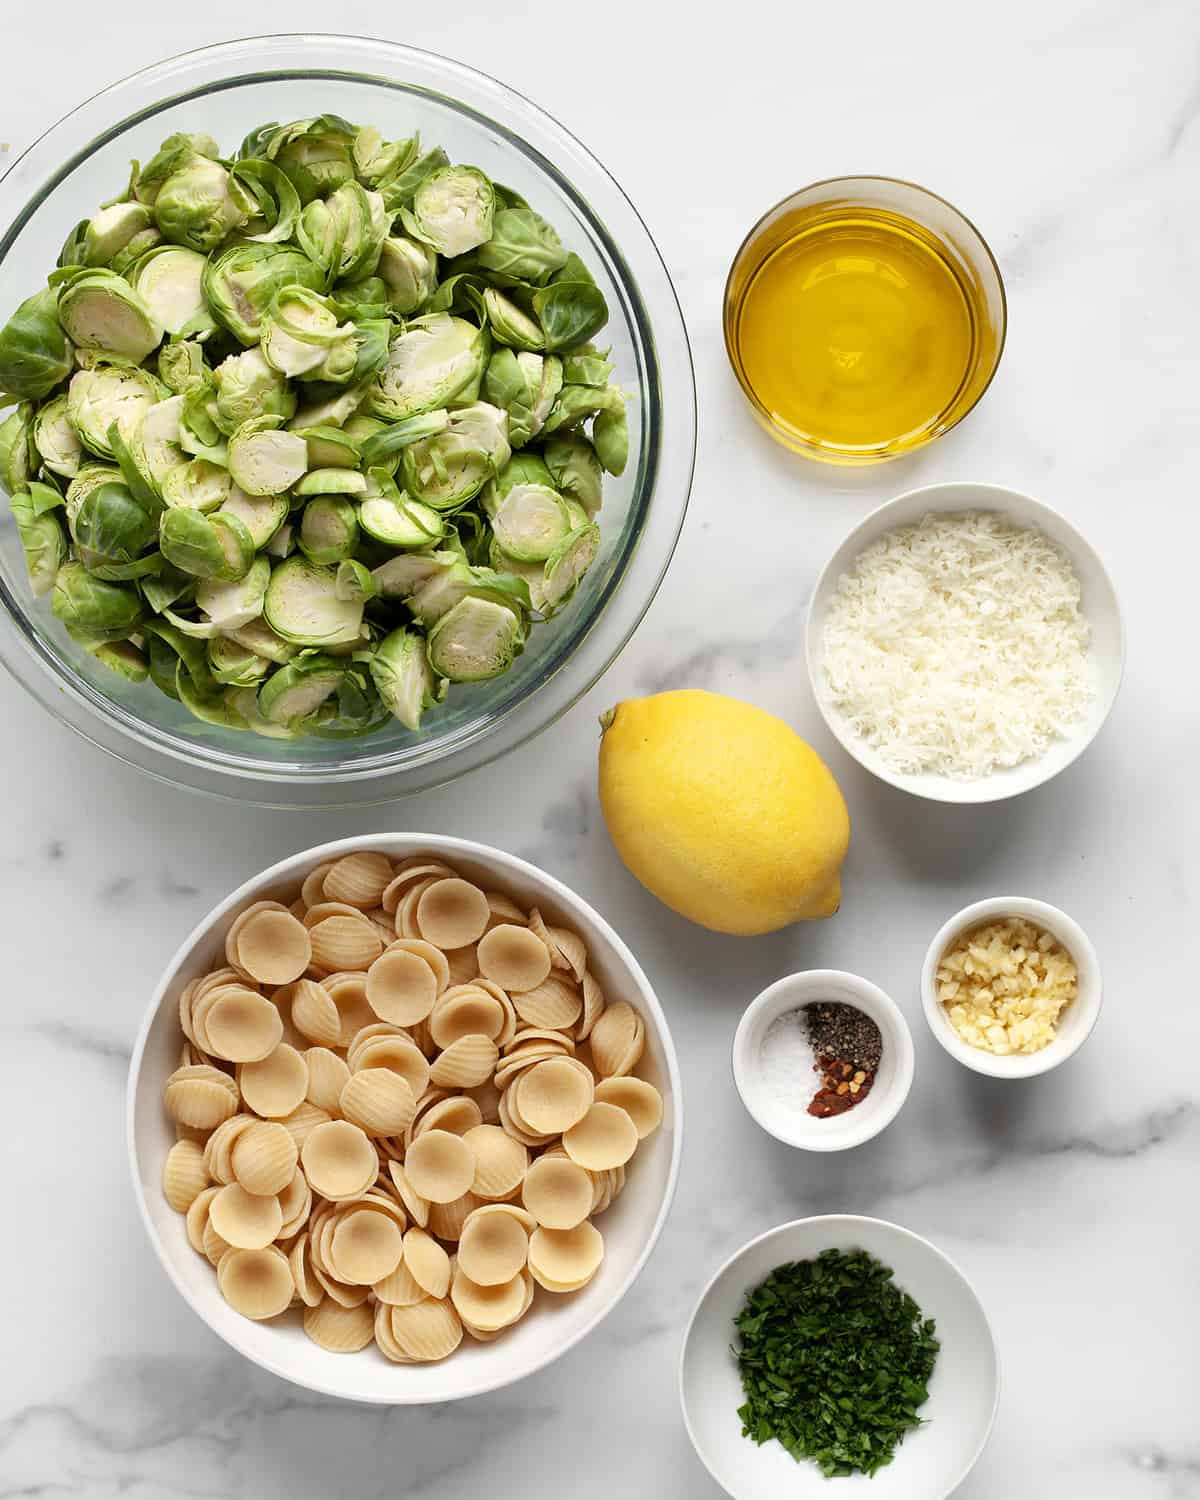 Ingredients including brussels sprouts, orecchiette, olive oil, lemon, garlic, pecorino, red pepper flakes, salt and pepper.